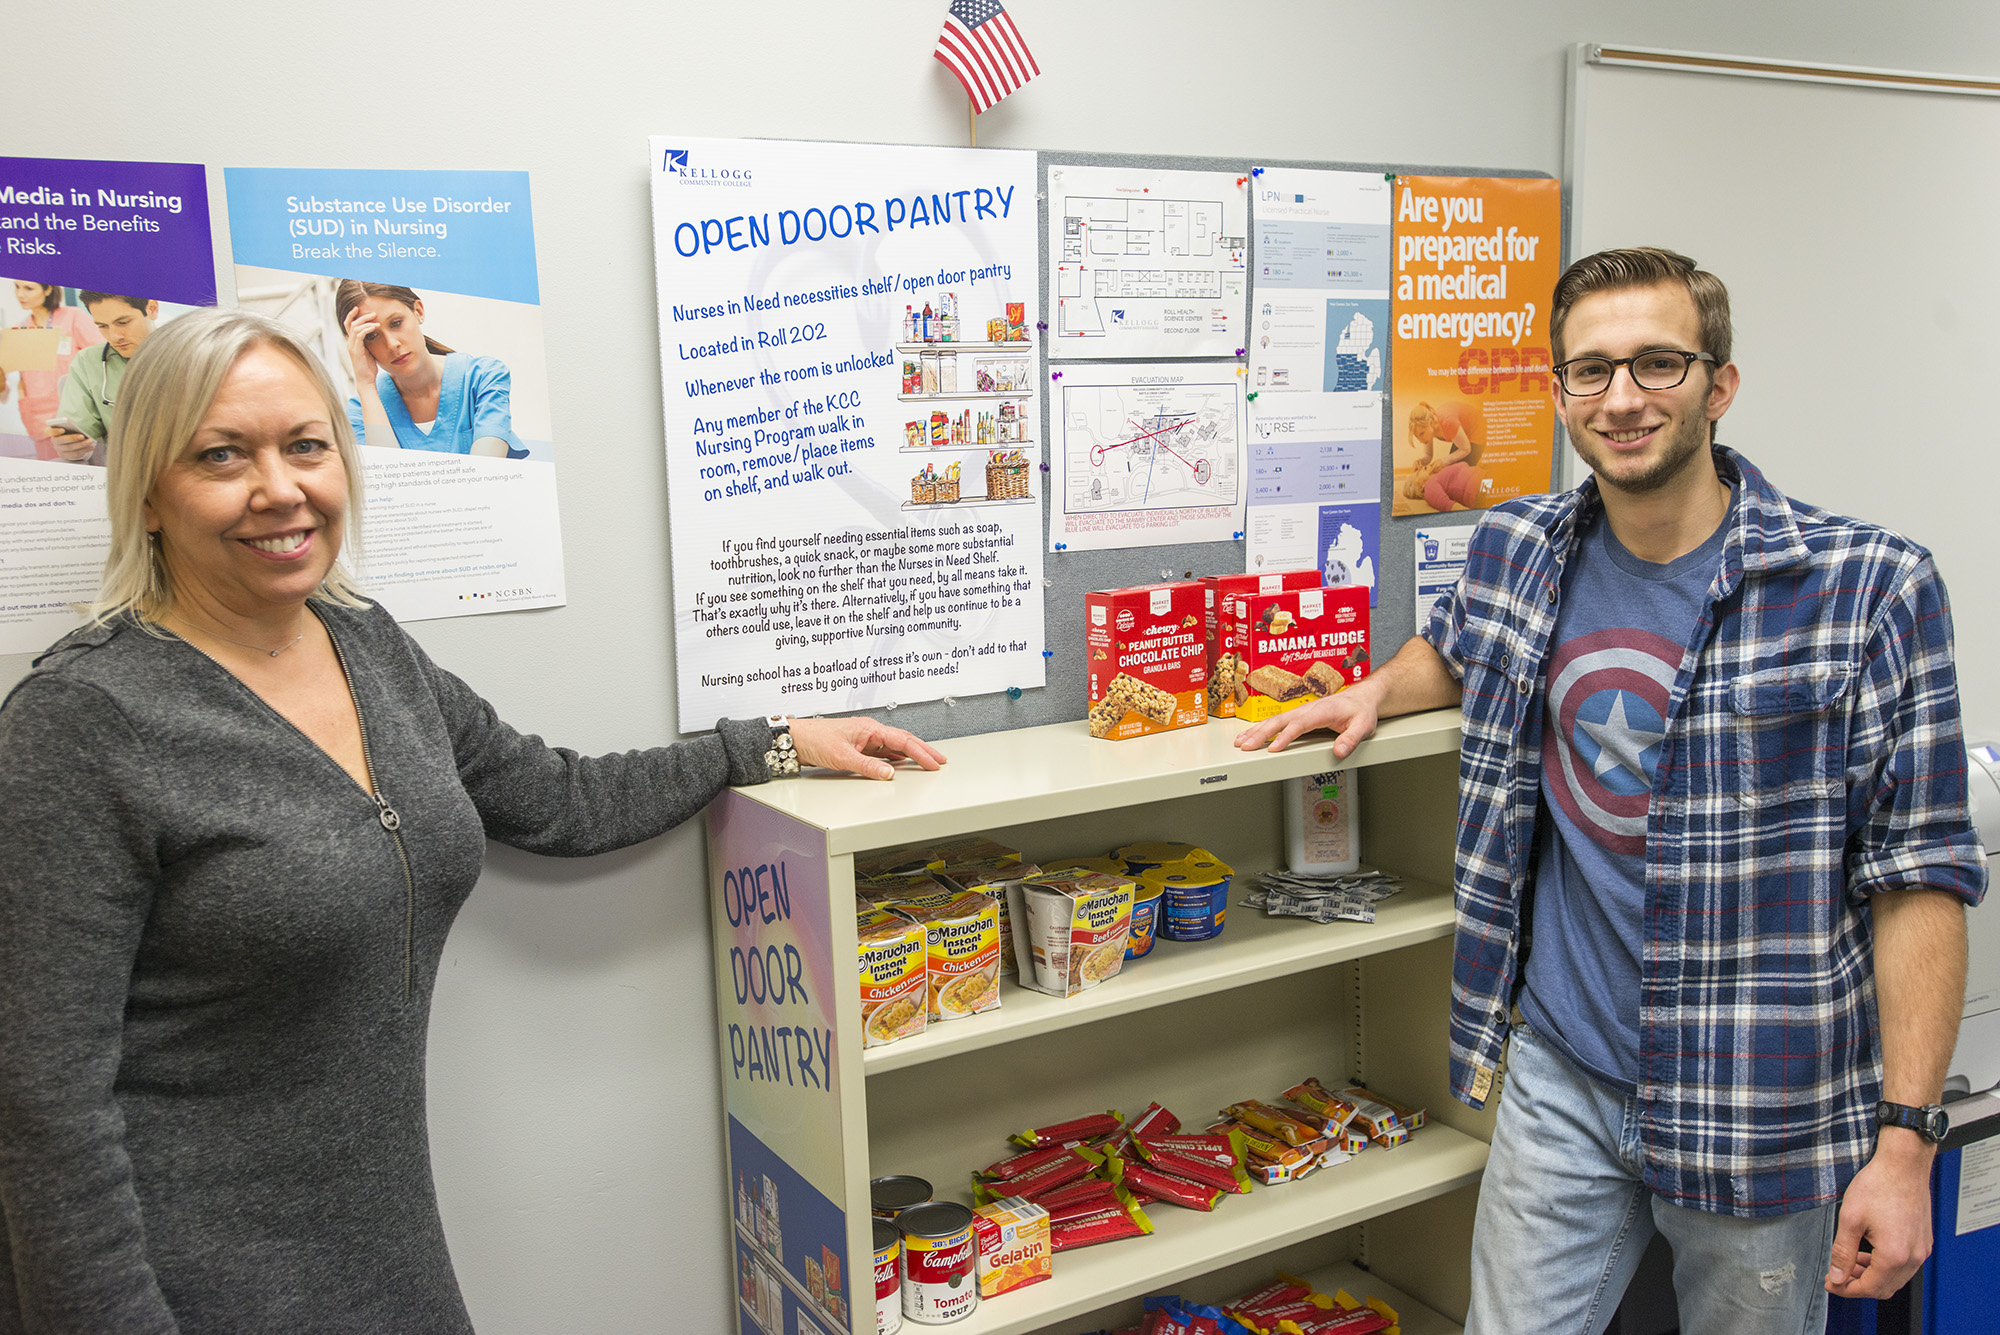 KCC Nursing professor Elizabeth Fluty, left, stands with Nursing student Isaac Lake by the Nurses in Need Open Door Pantry on campus in Battle Creek. The pantry is supplied by the KCC community to provide food, hygiene and other items to KCC Nursing students in need.